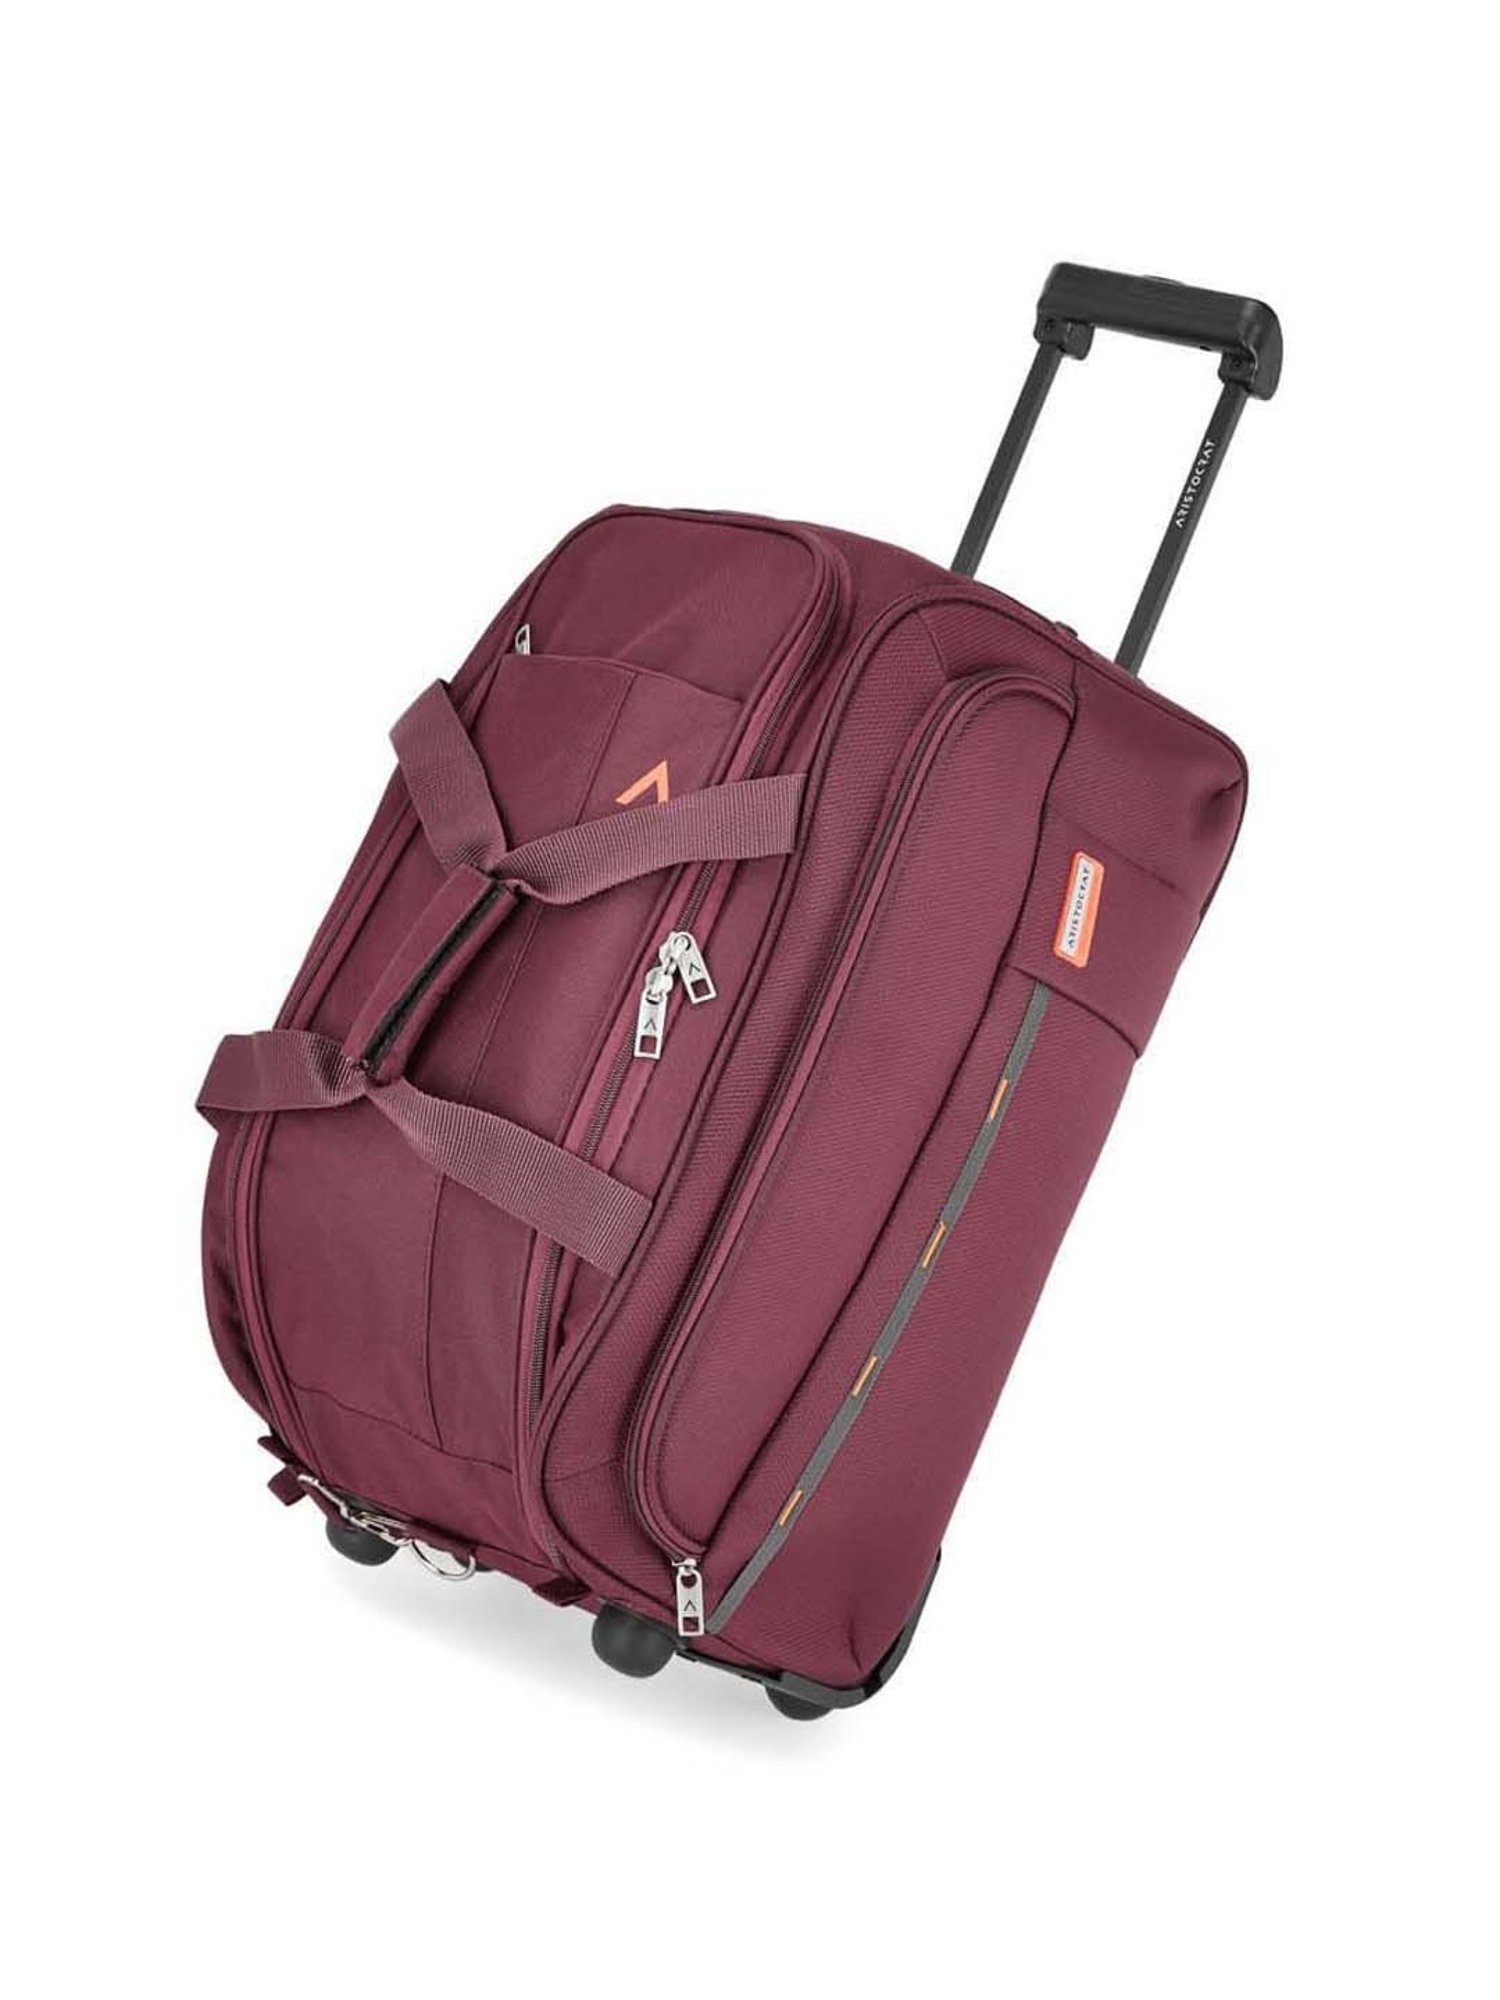 Best small trolley bags in India | Business Insider India